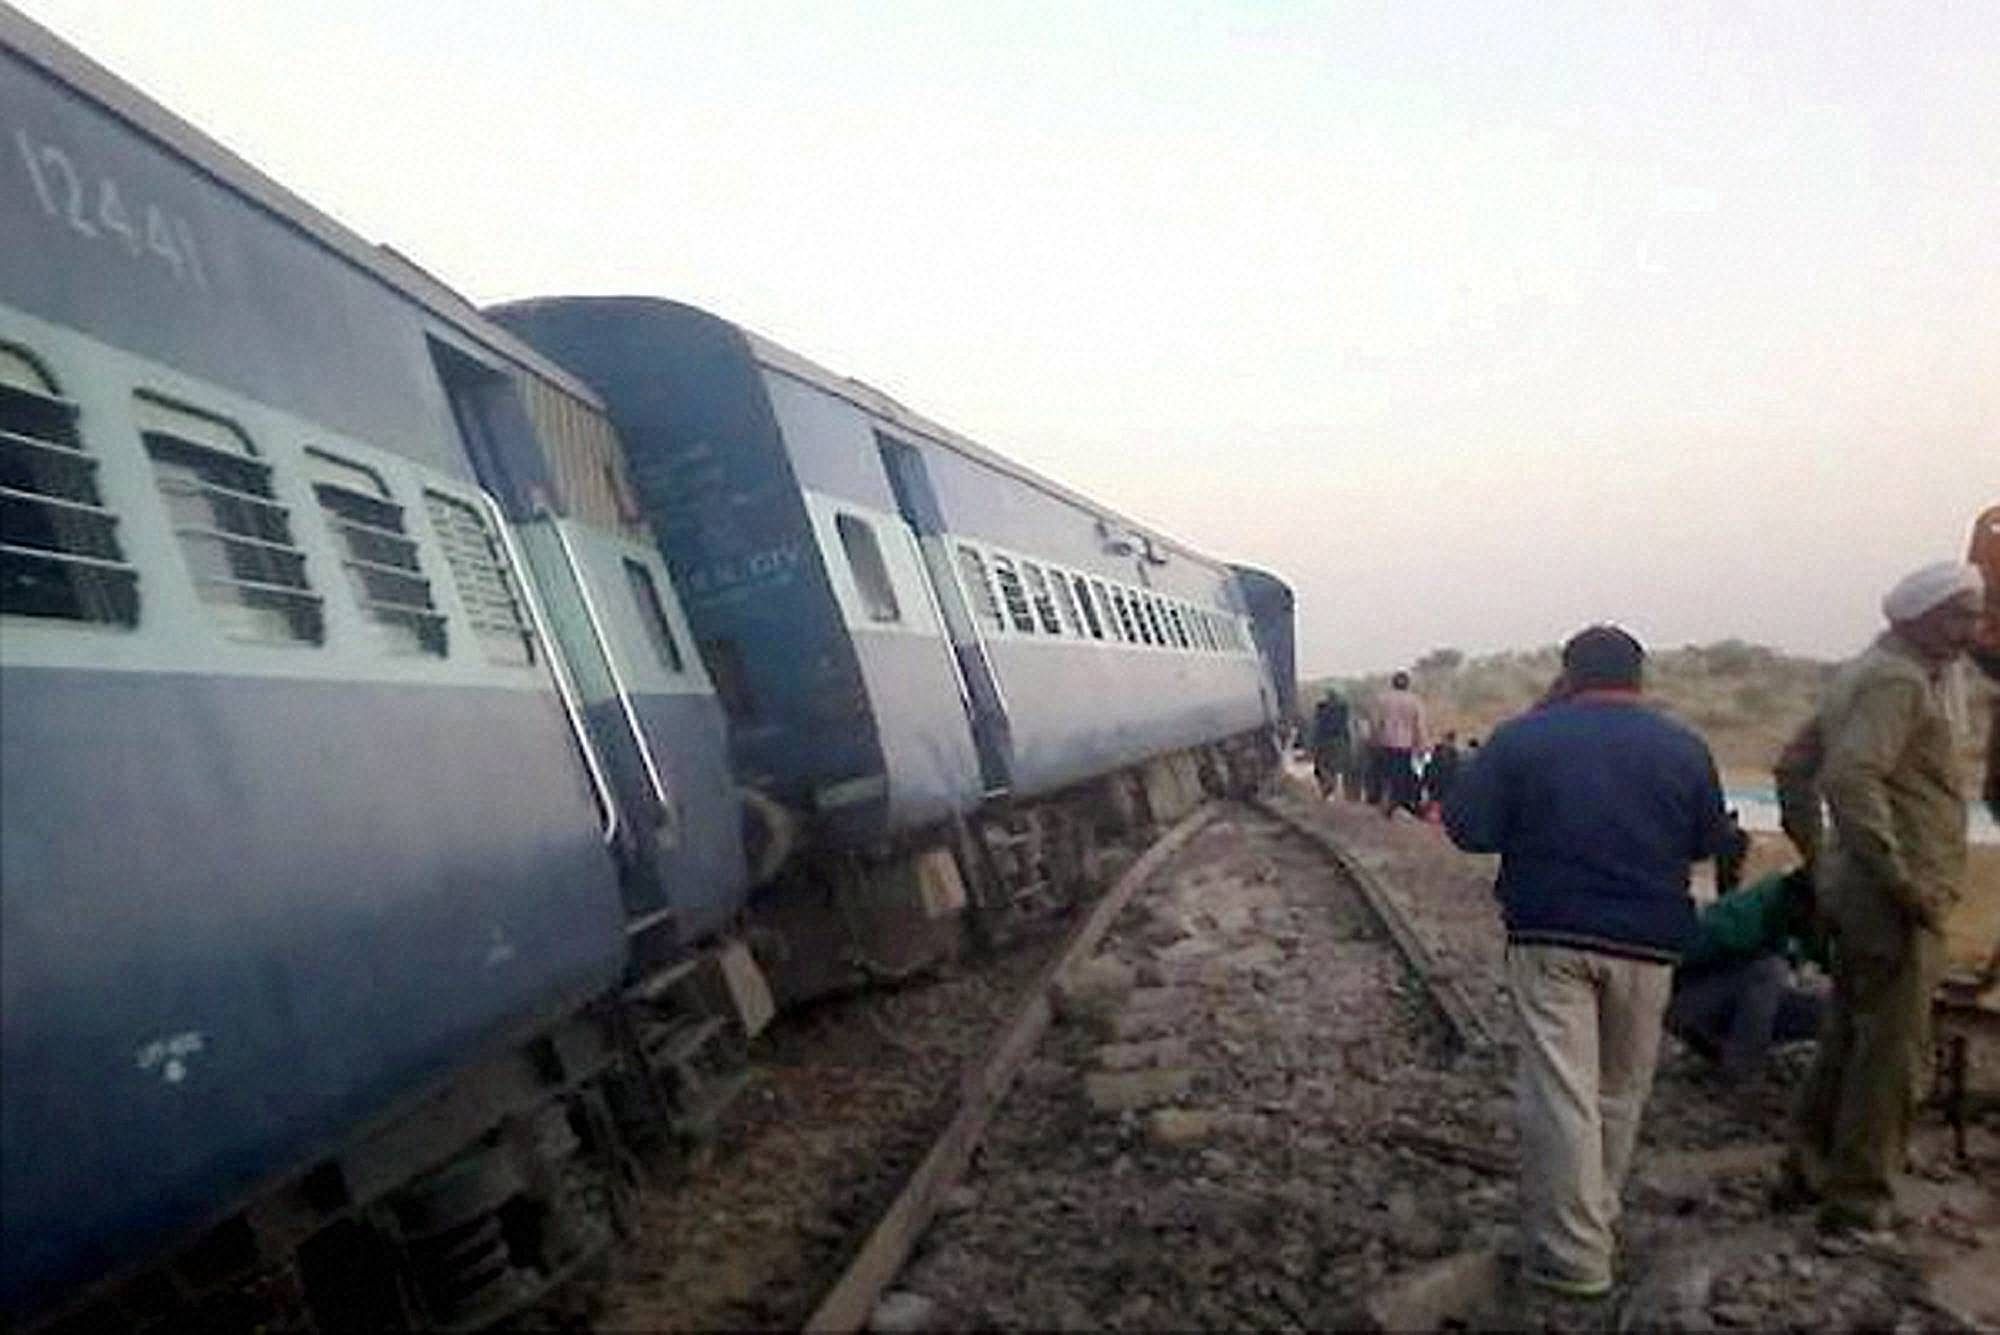 Two coaches of the Chennai-Mangalore Superfast Express derailed near Shoranur in Kerala on Tuesday morning, disrupting rail traffic. PTI file photo for representation only